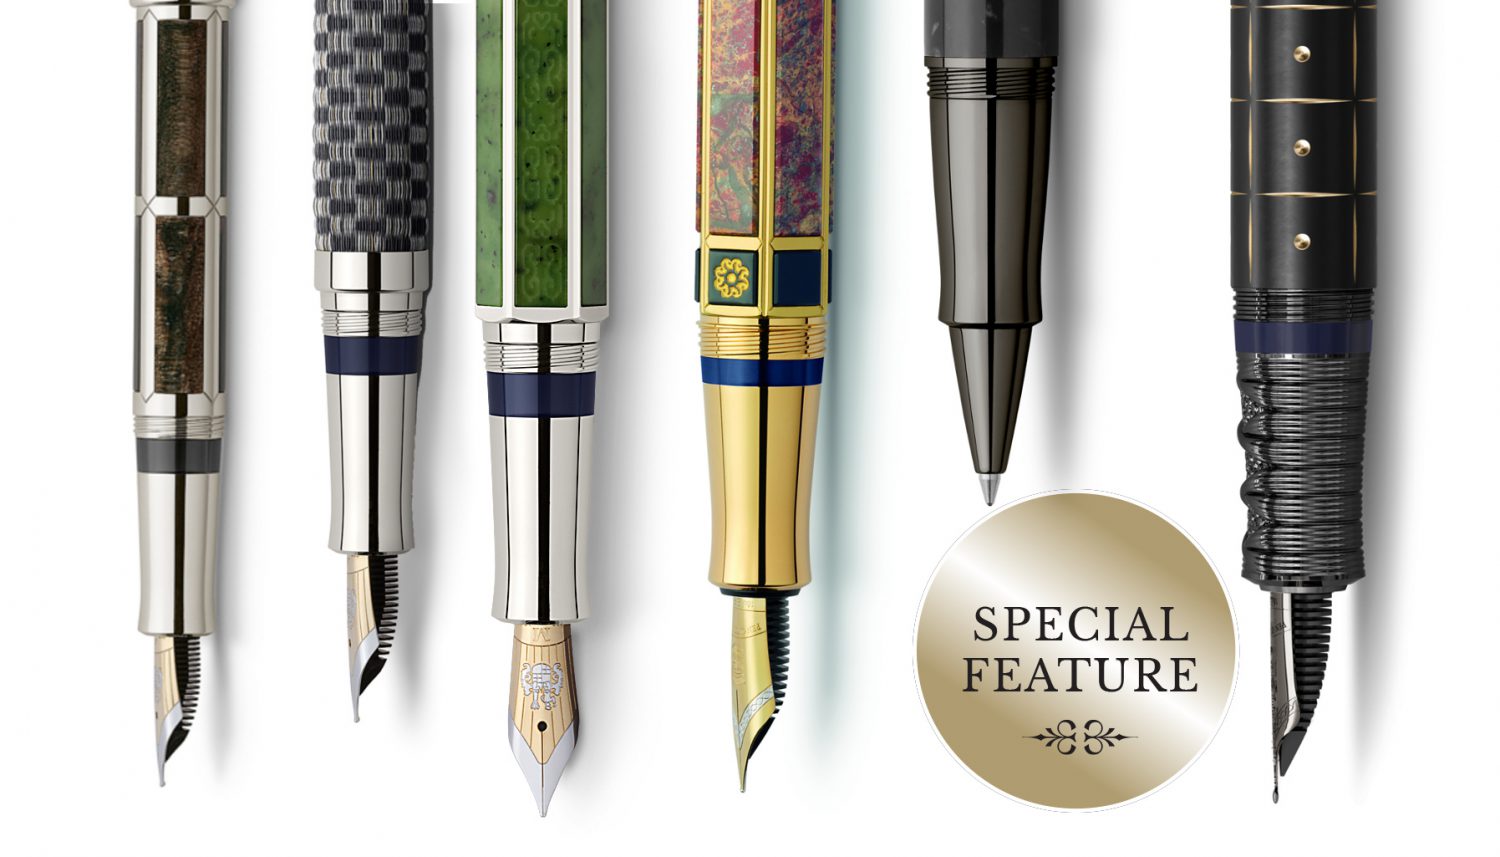 A Look At The Stunning And Refined Evolution Of The Graf Von Faber